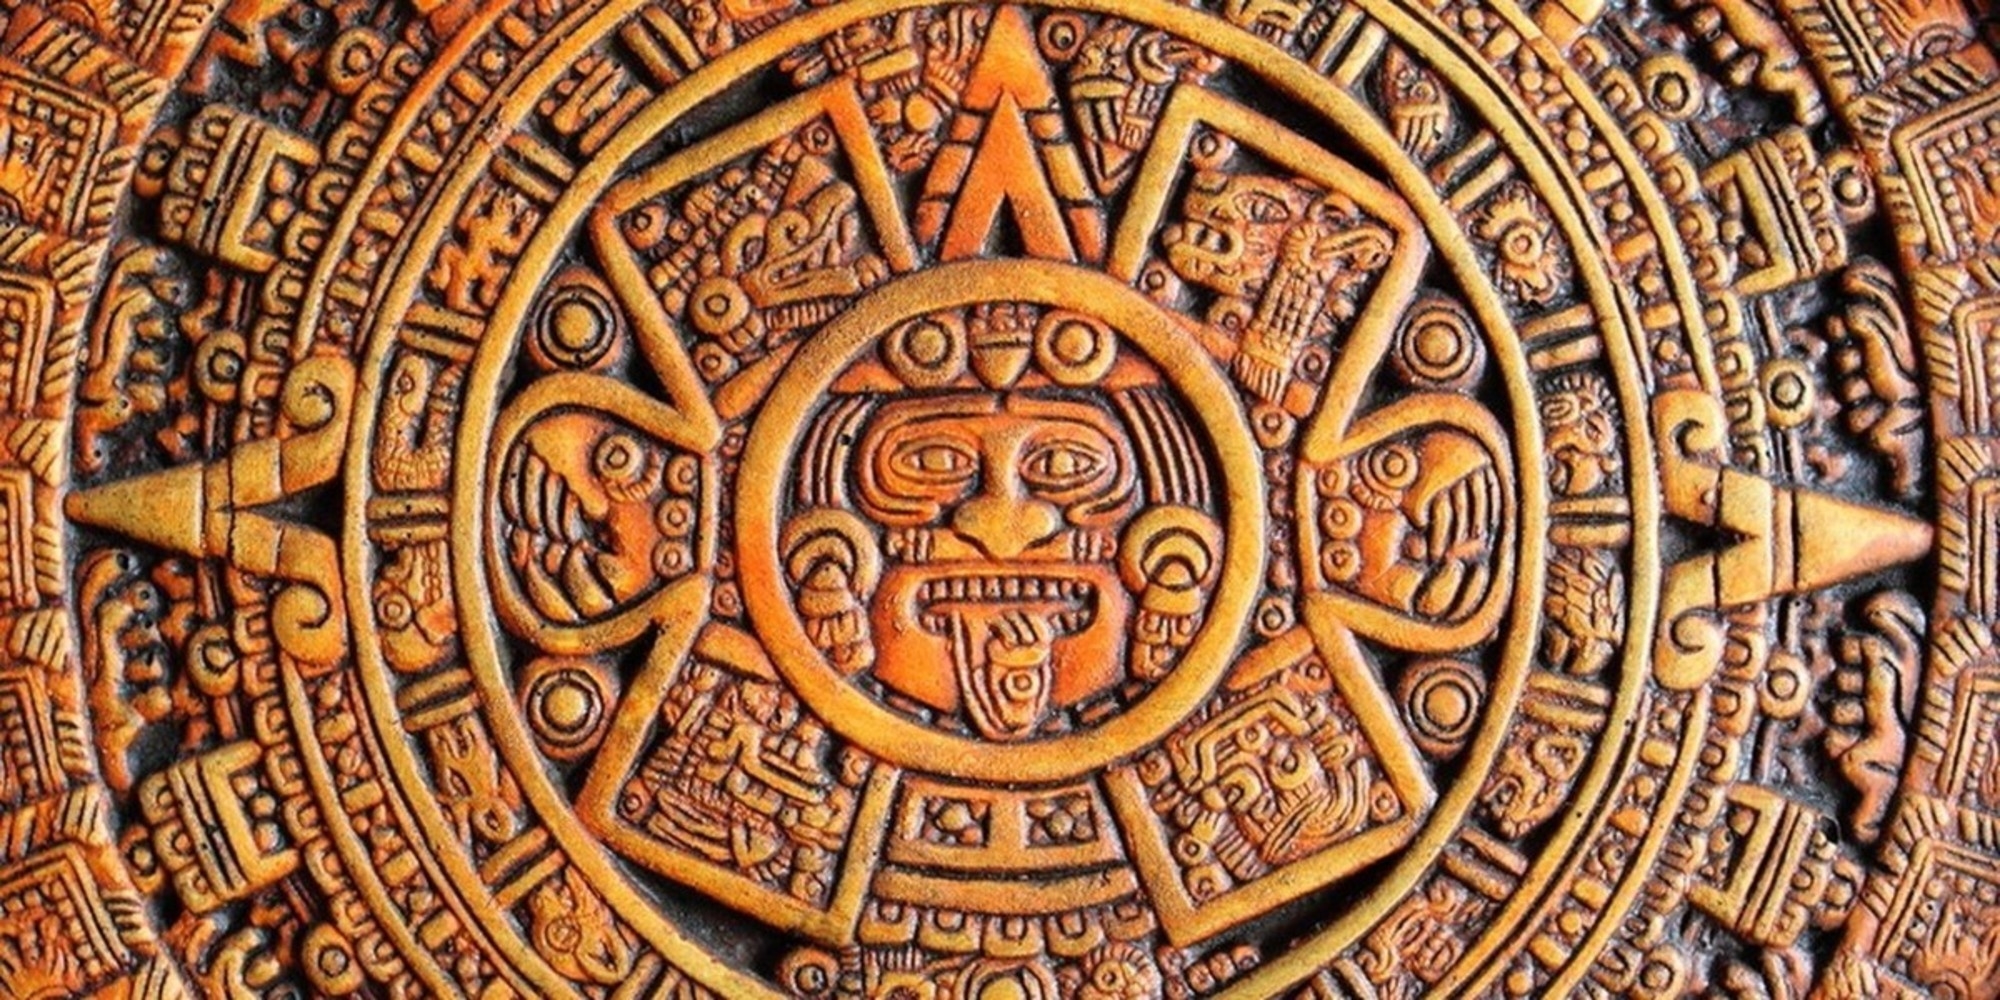 Discover Your Mayan Birth Sign And Its Meaning - Higher Perspective Mayan Calendar Zodiac Symbols